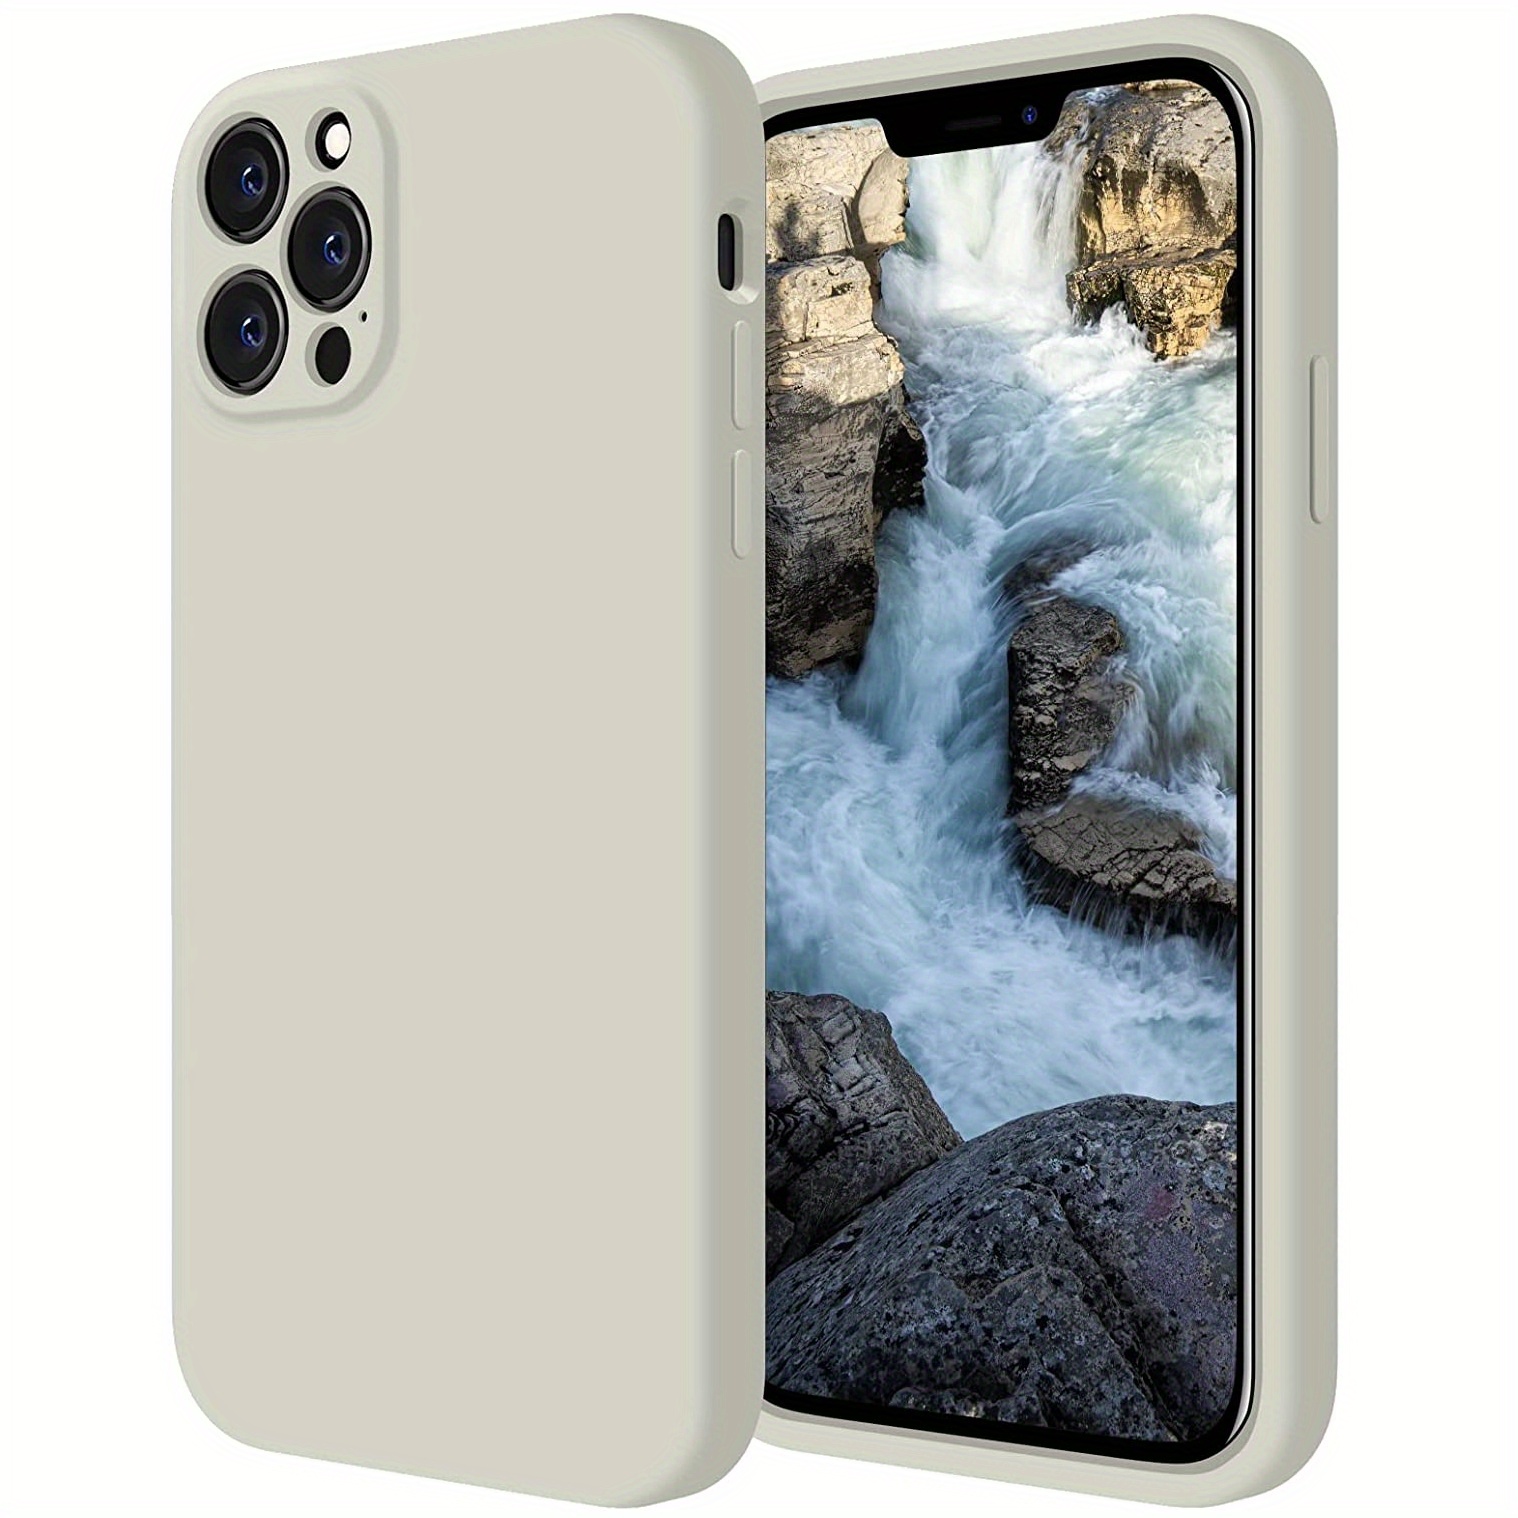 IPhone 12 Pro Max protective stone cases